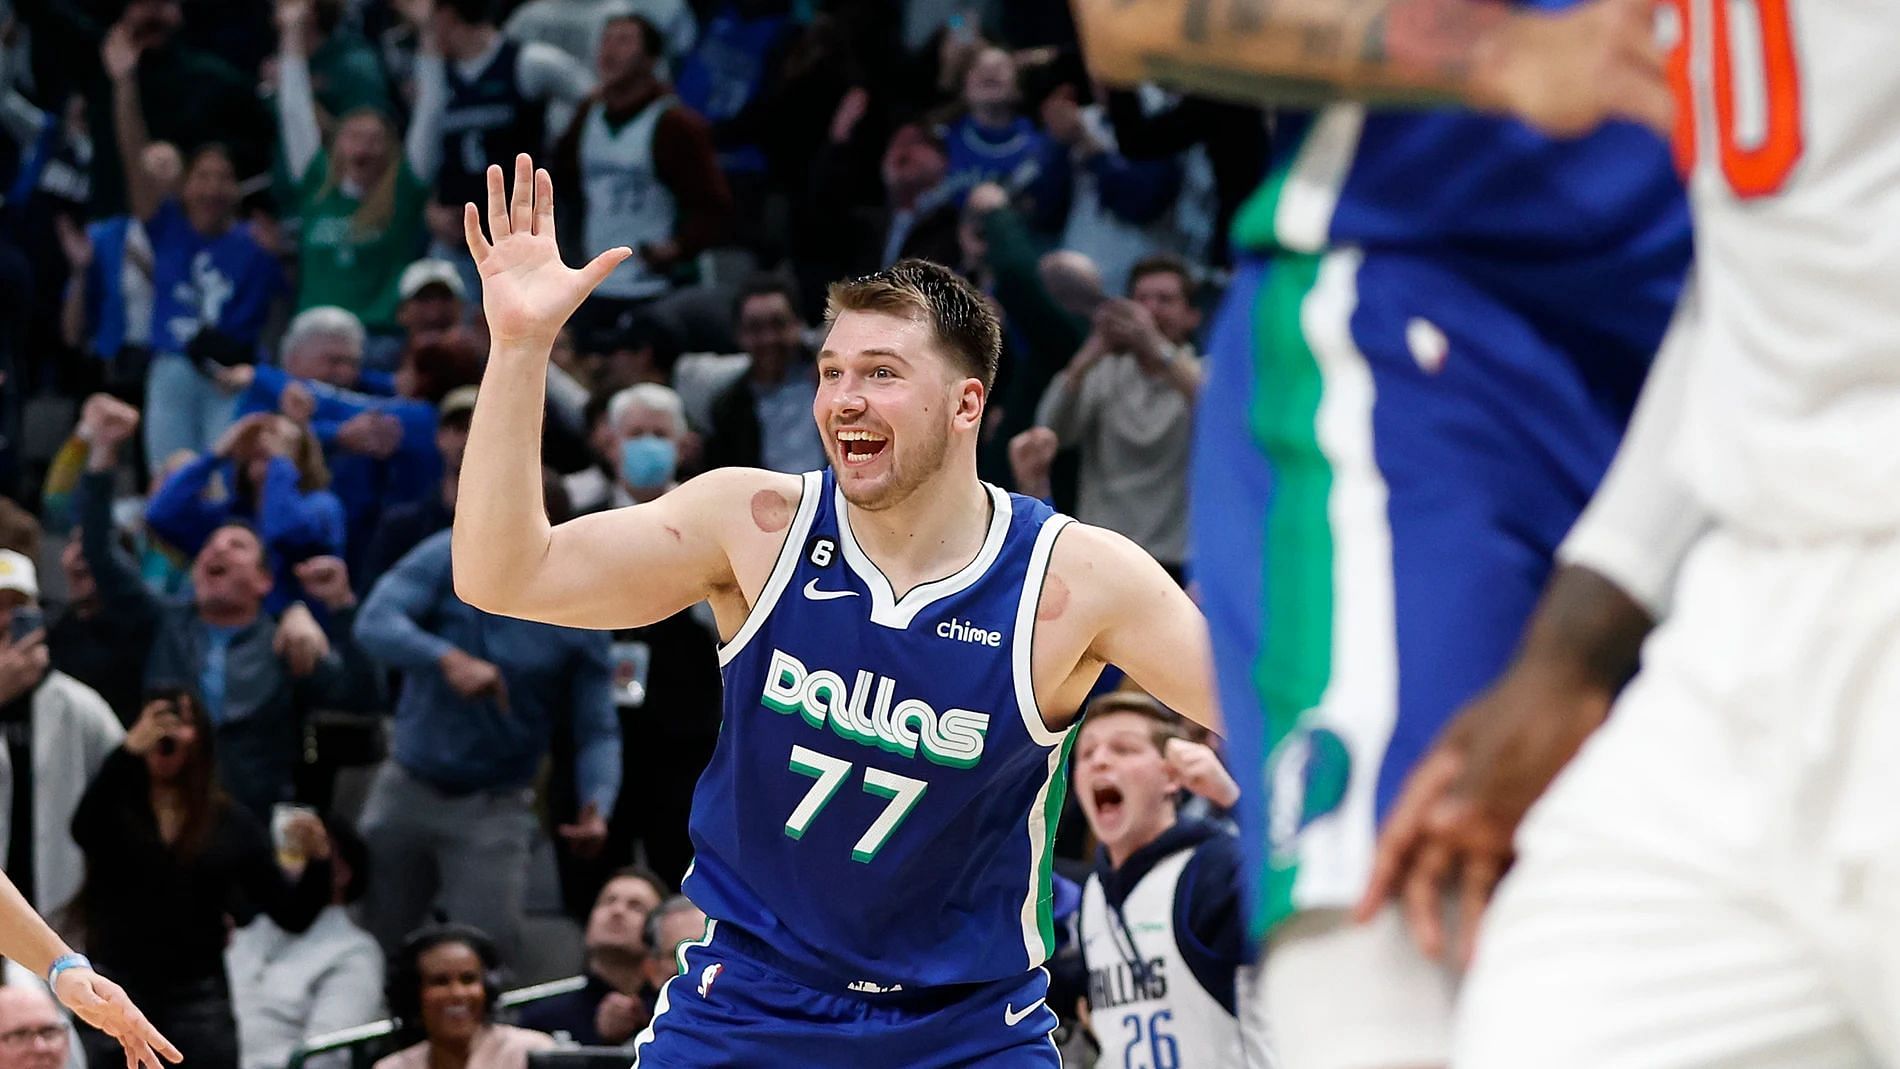 Fans react to 1st anniversary of Luka Doncic